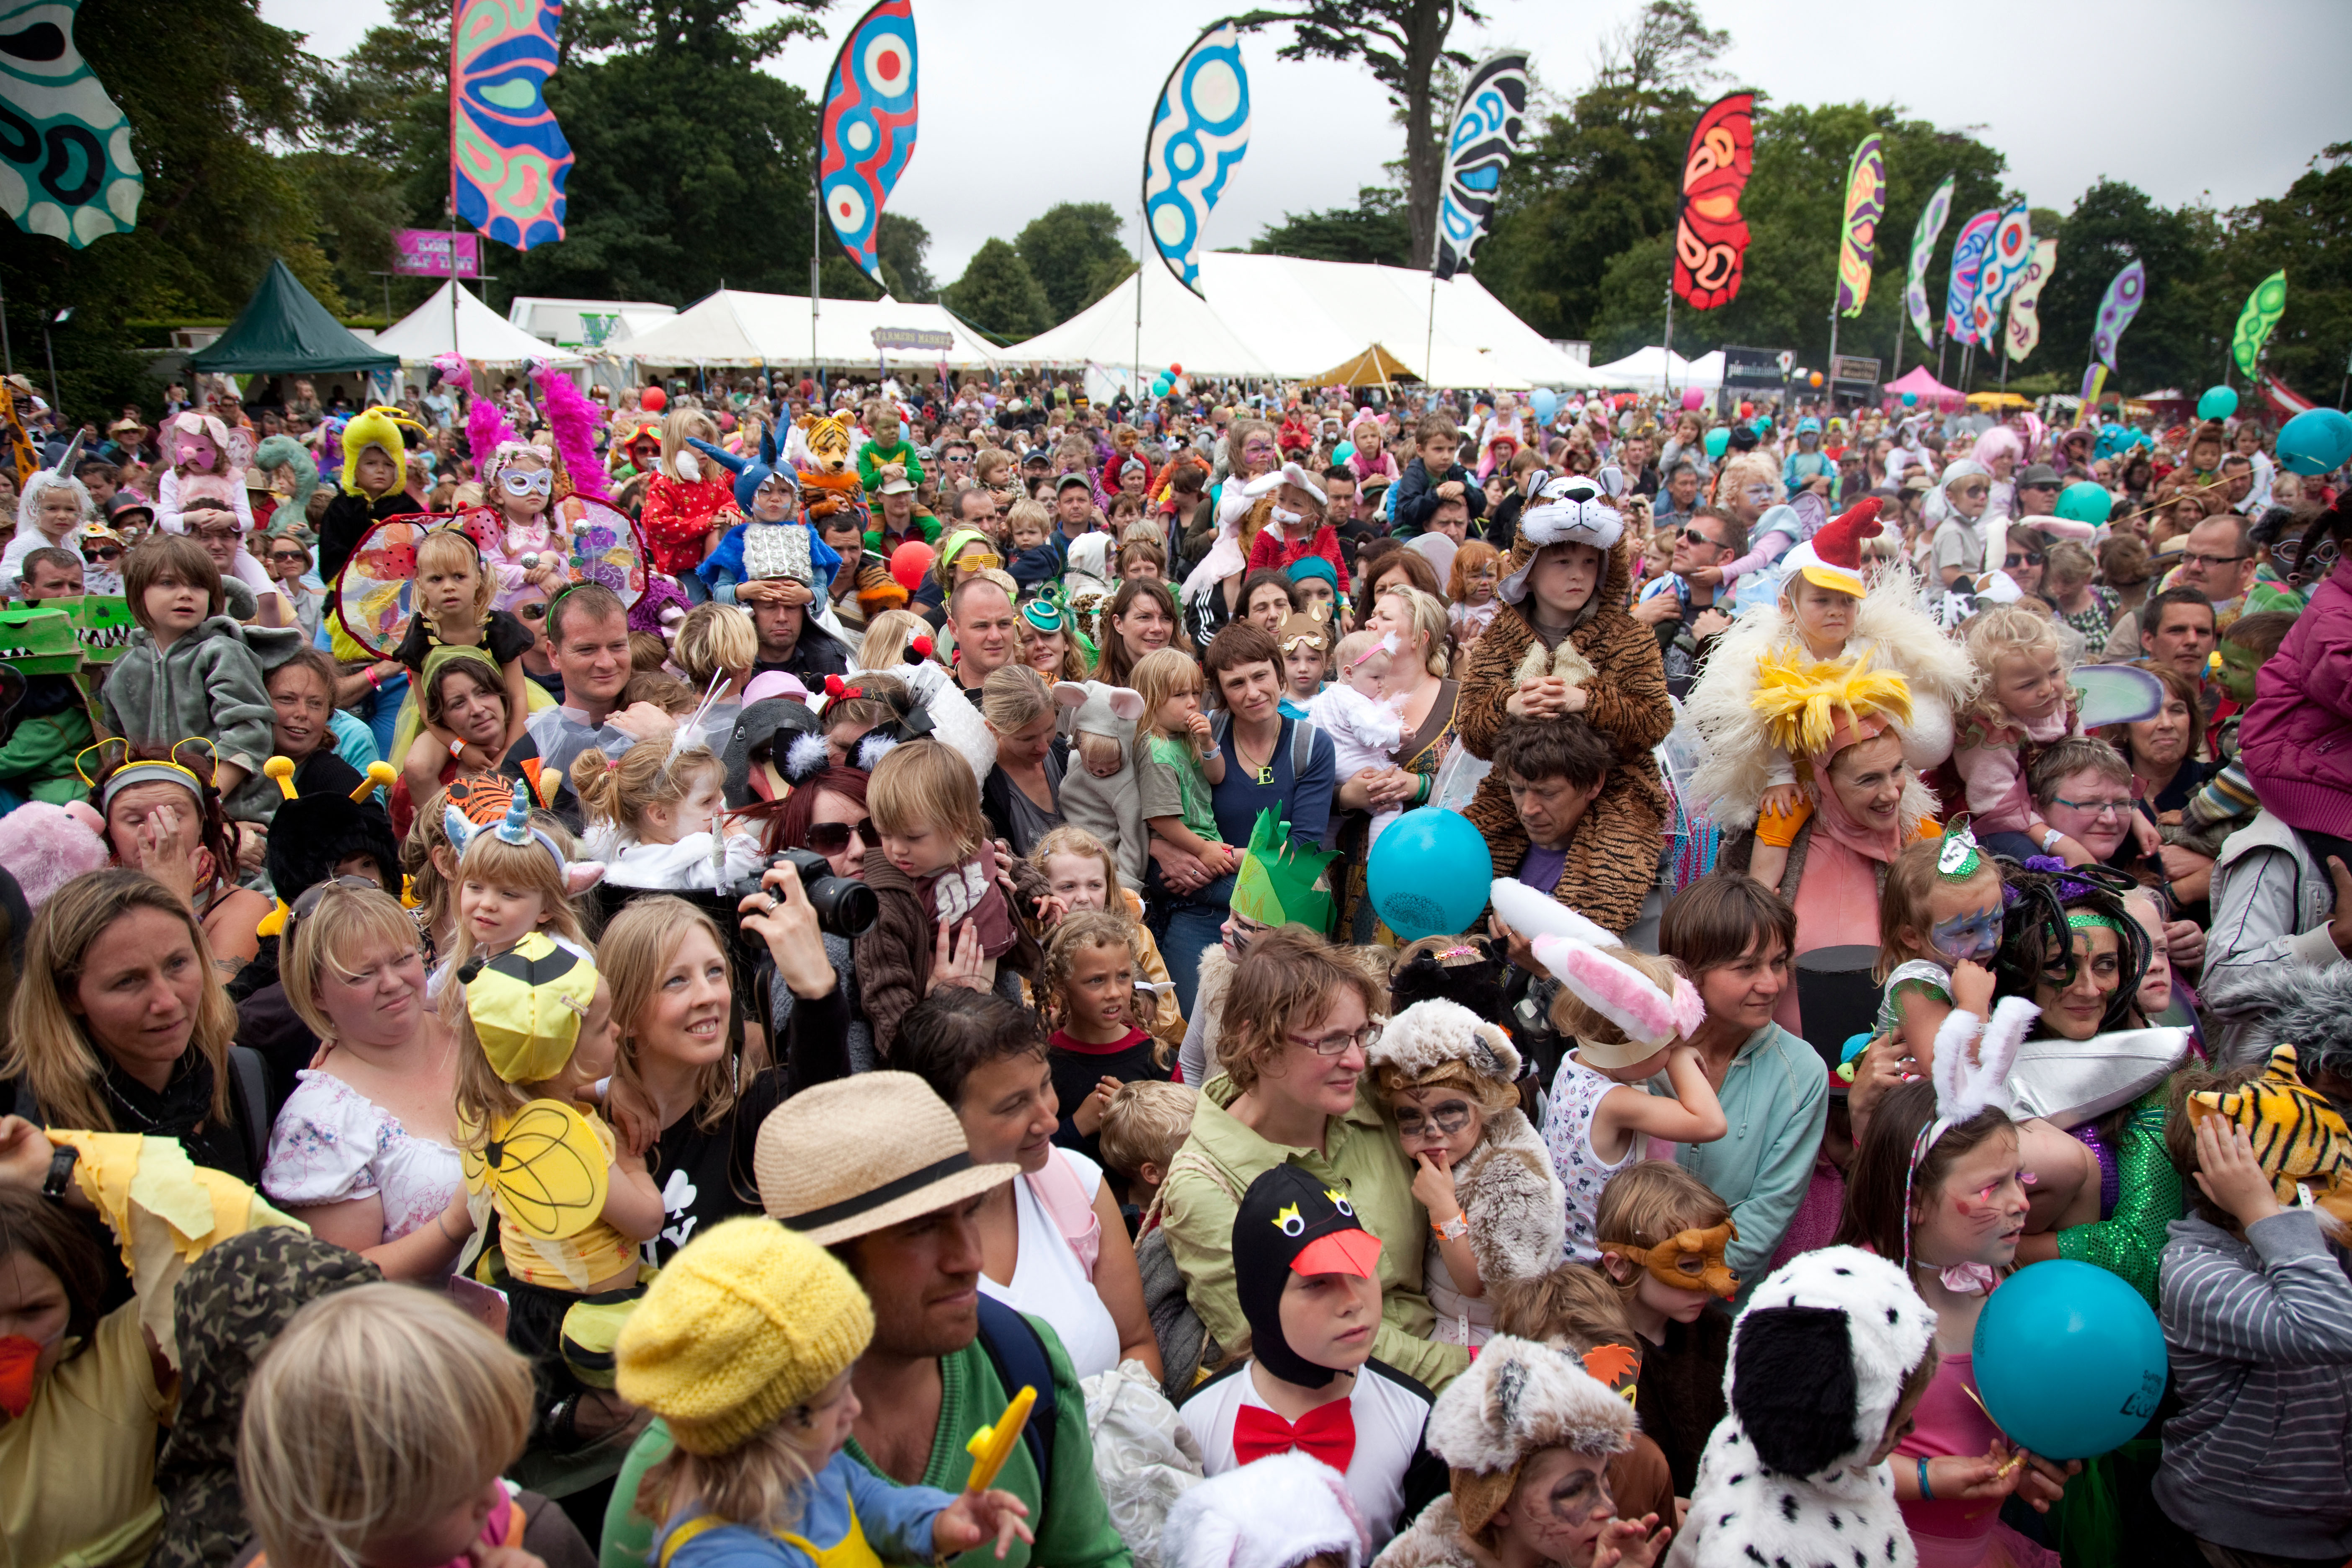 Fancy dress is strongly encouraged for those attending Camp Bestival in Dorset